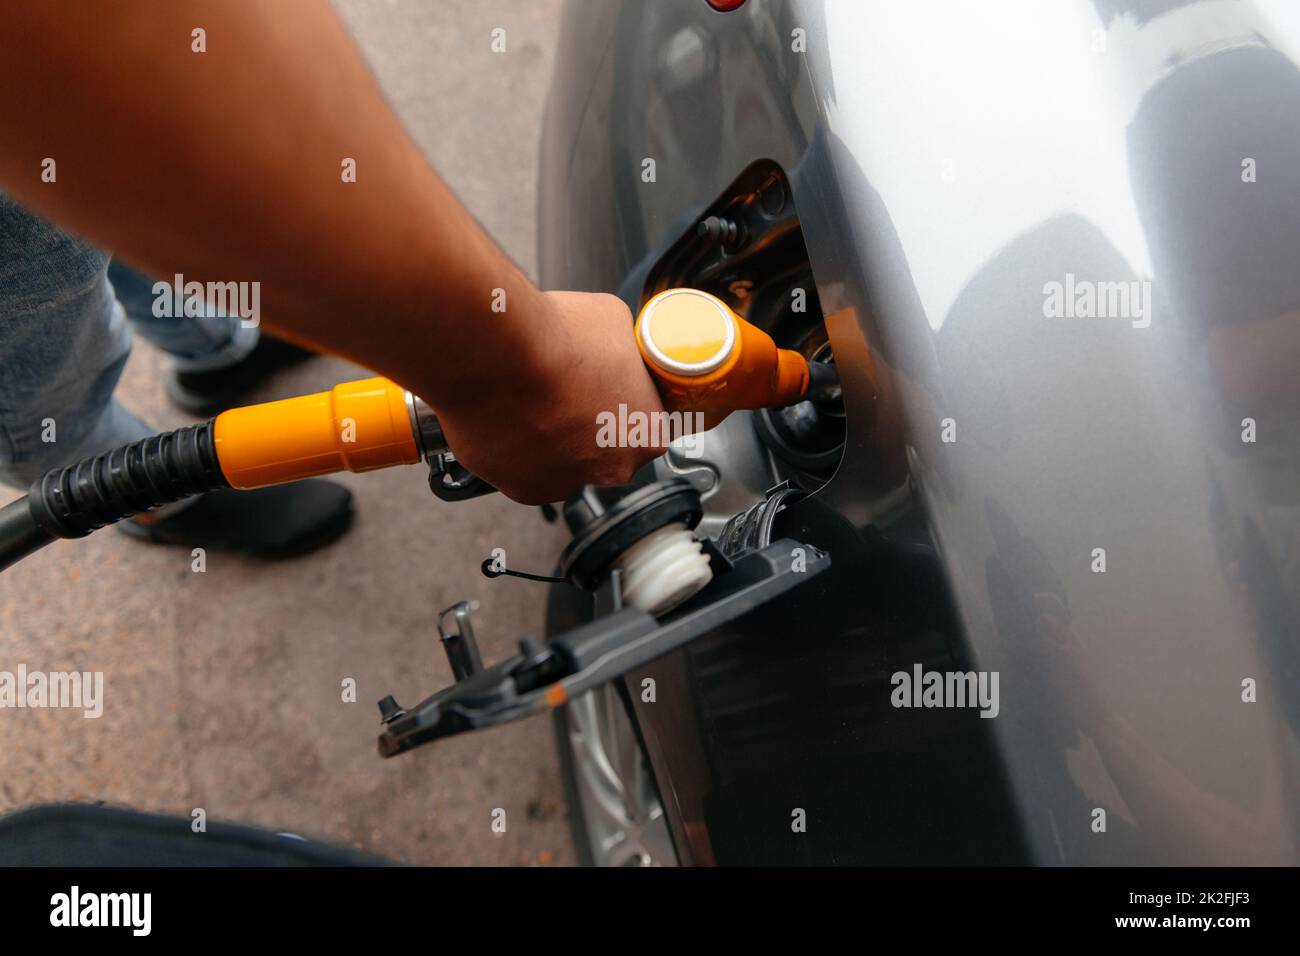 Hand Man Refill and filling Oil Gas Fuel at station. Refueling automobile with gasoline or diesel with a fuel dispenser. Fuel business Stock Photo